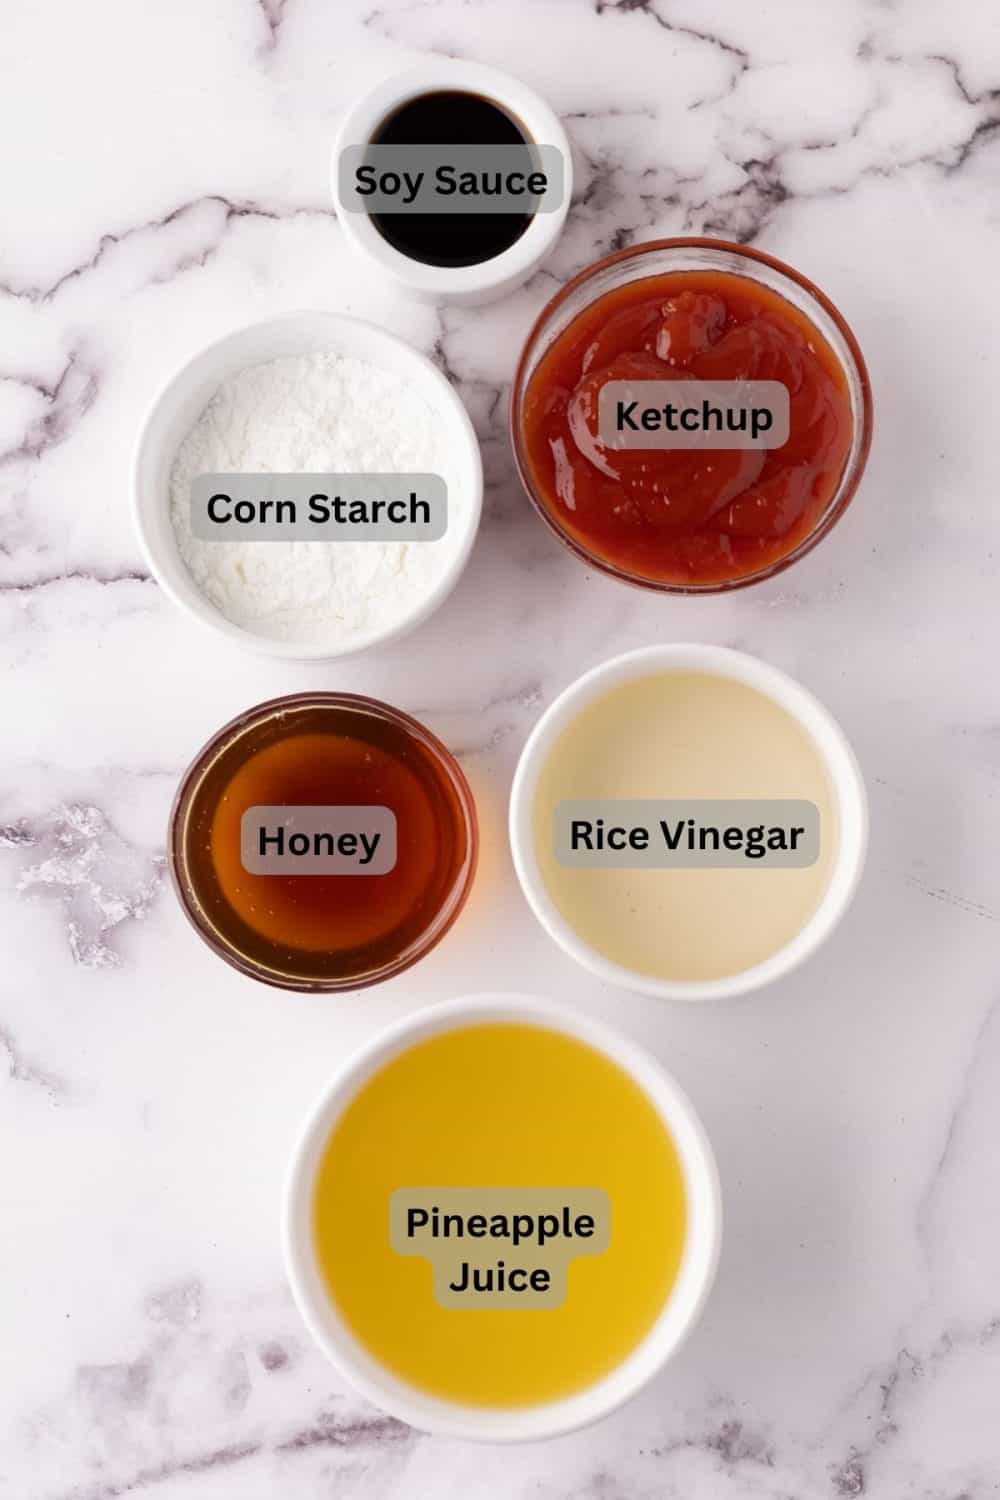 Digitally labeled ingredients in a bowl.